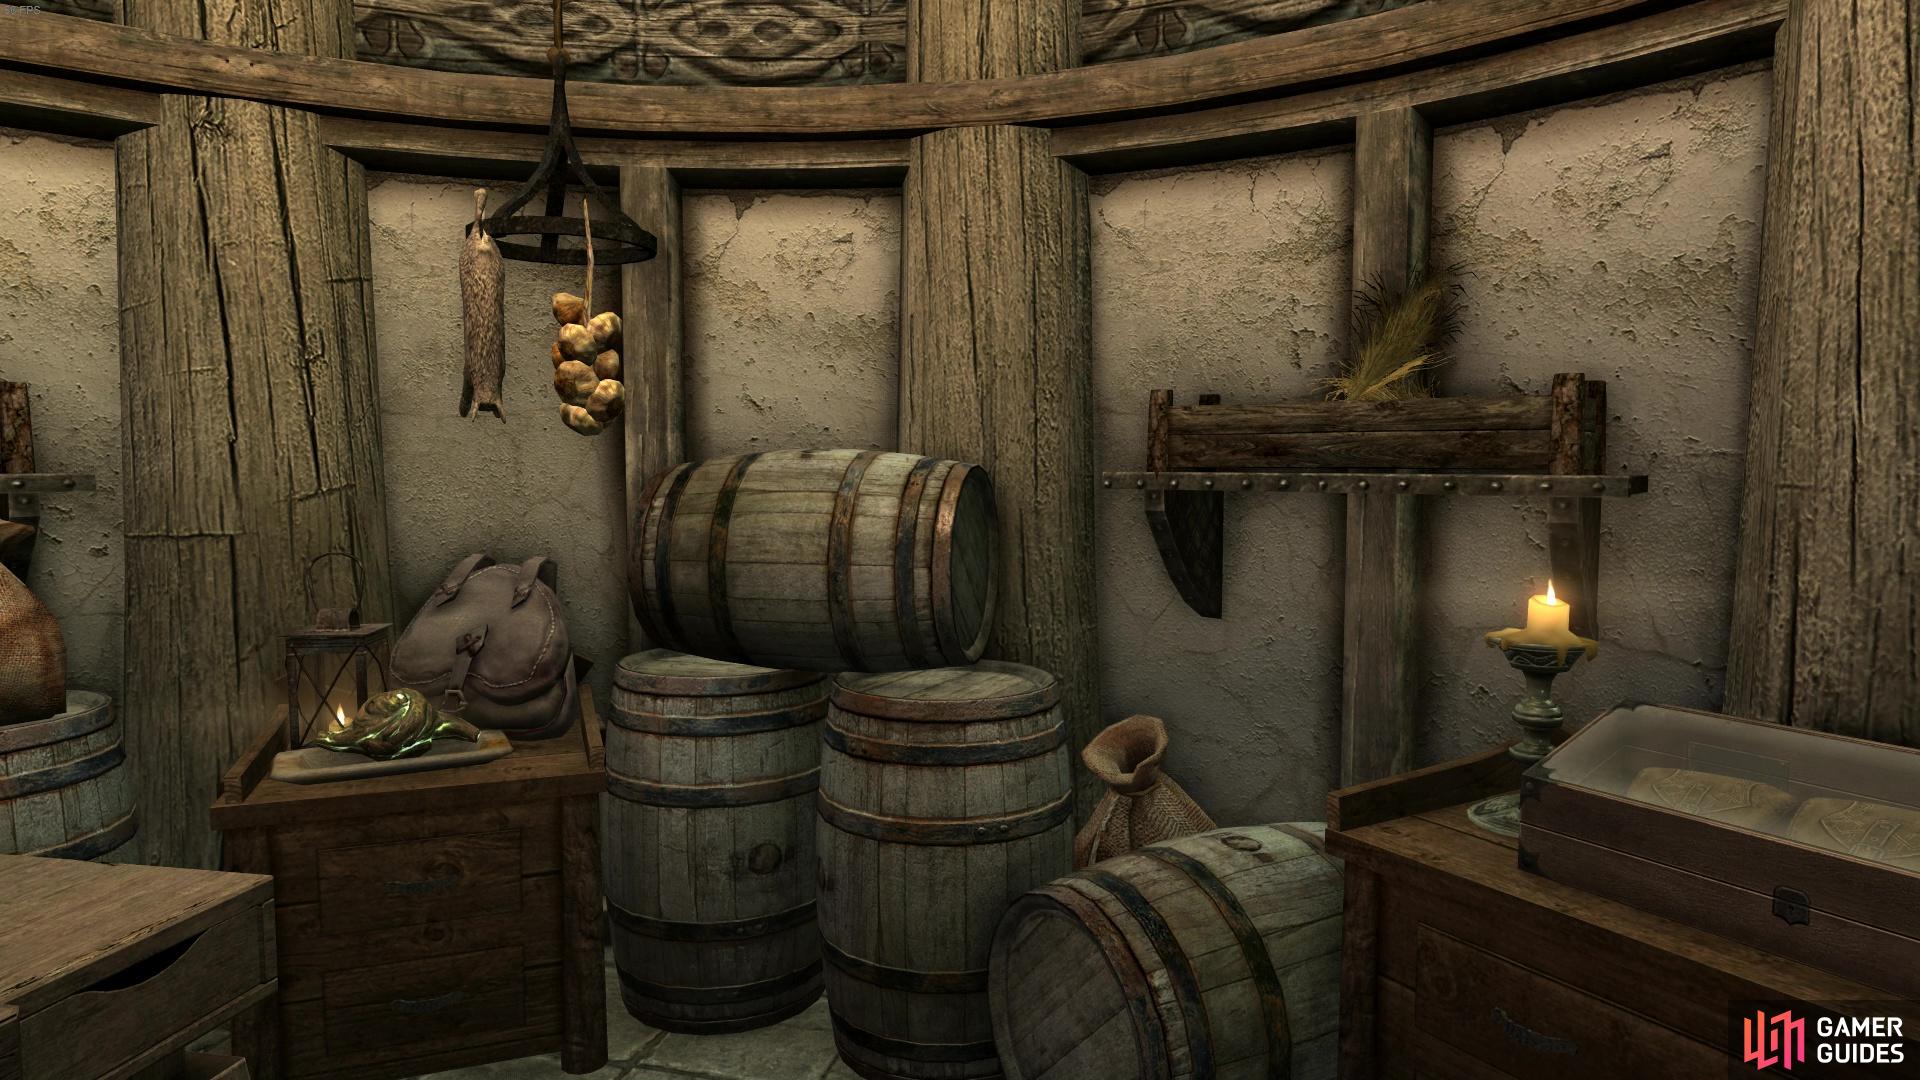 On the bottom floor, you’ll find lots of barrels and storage space.